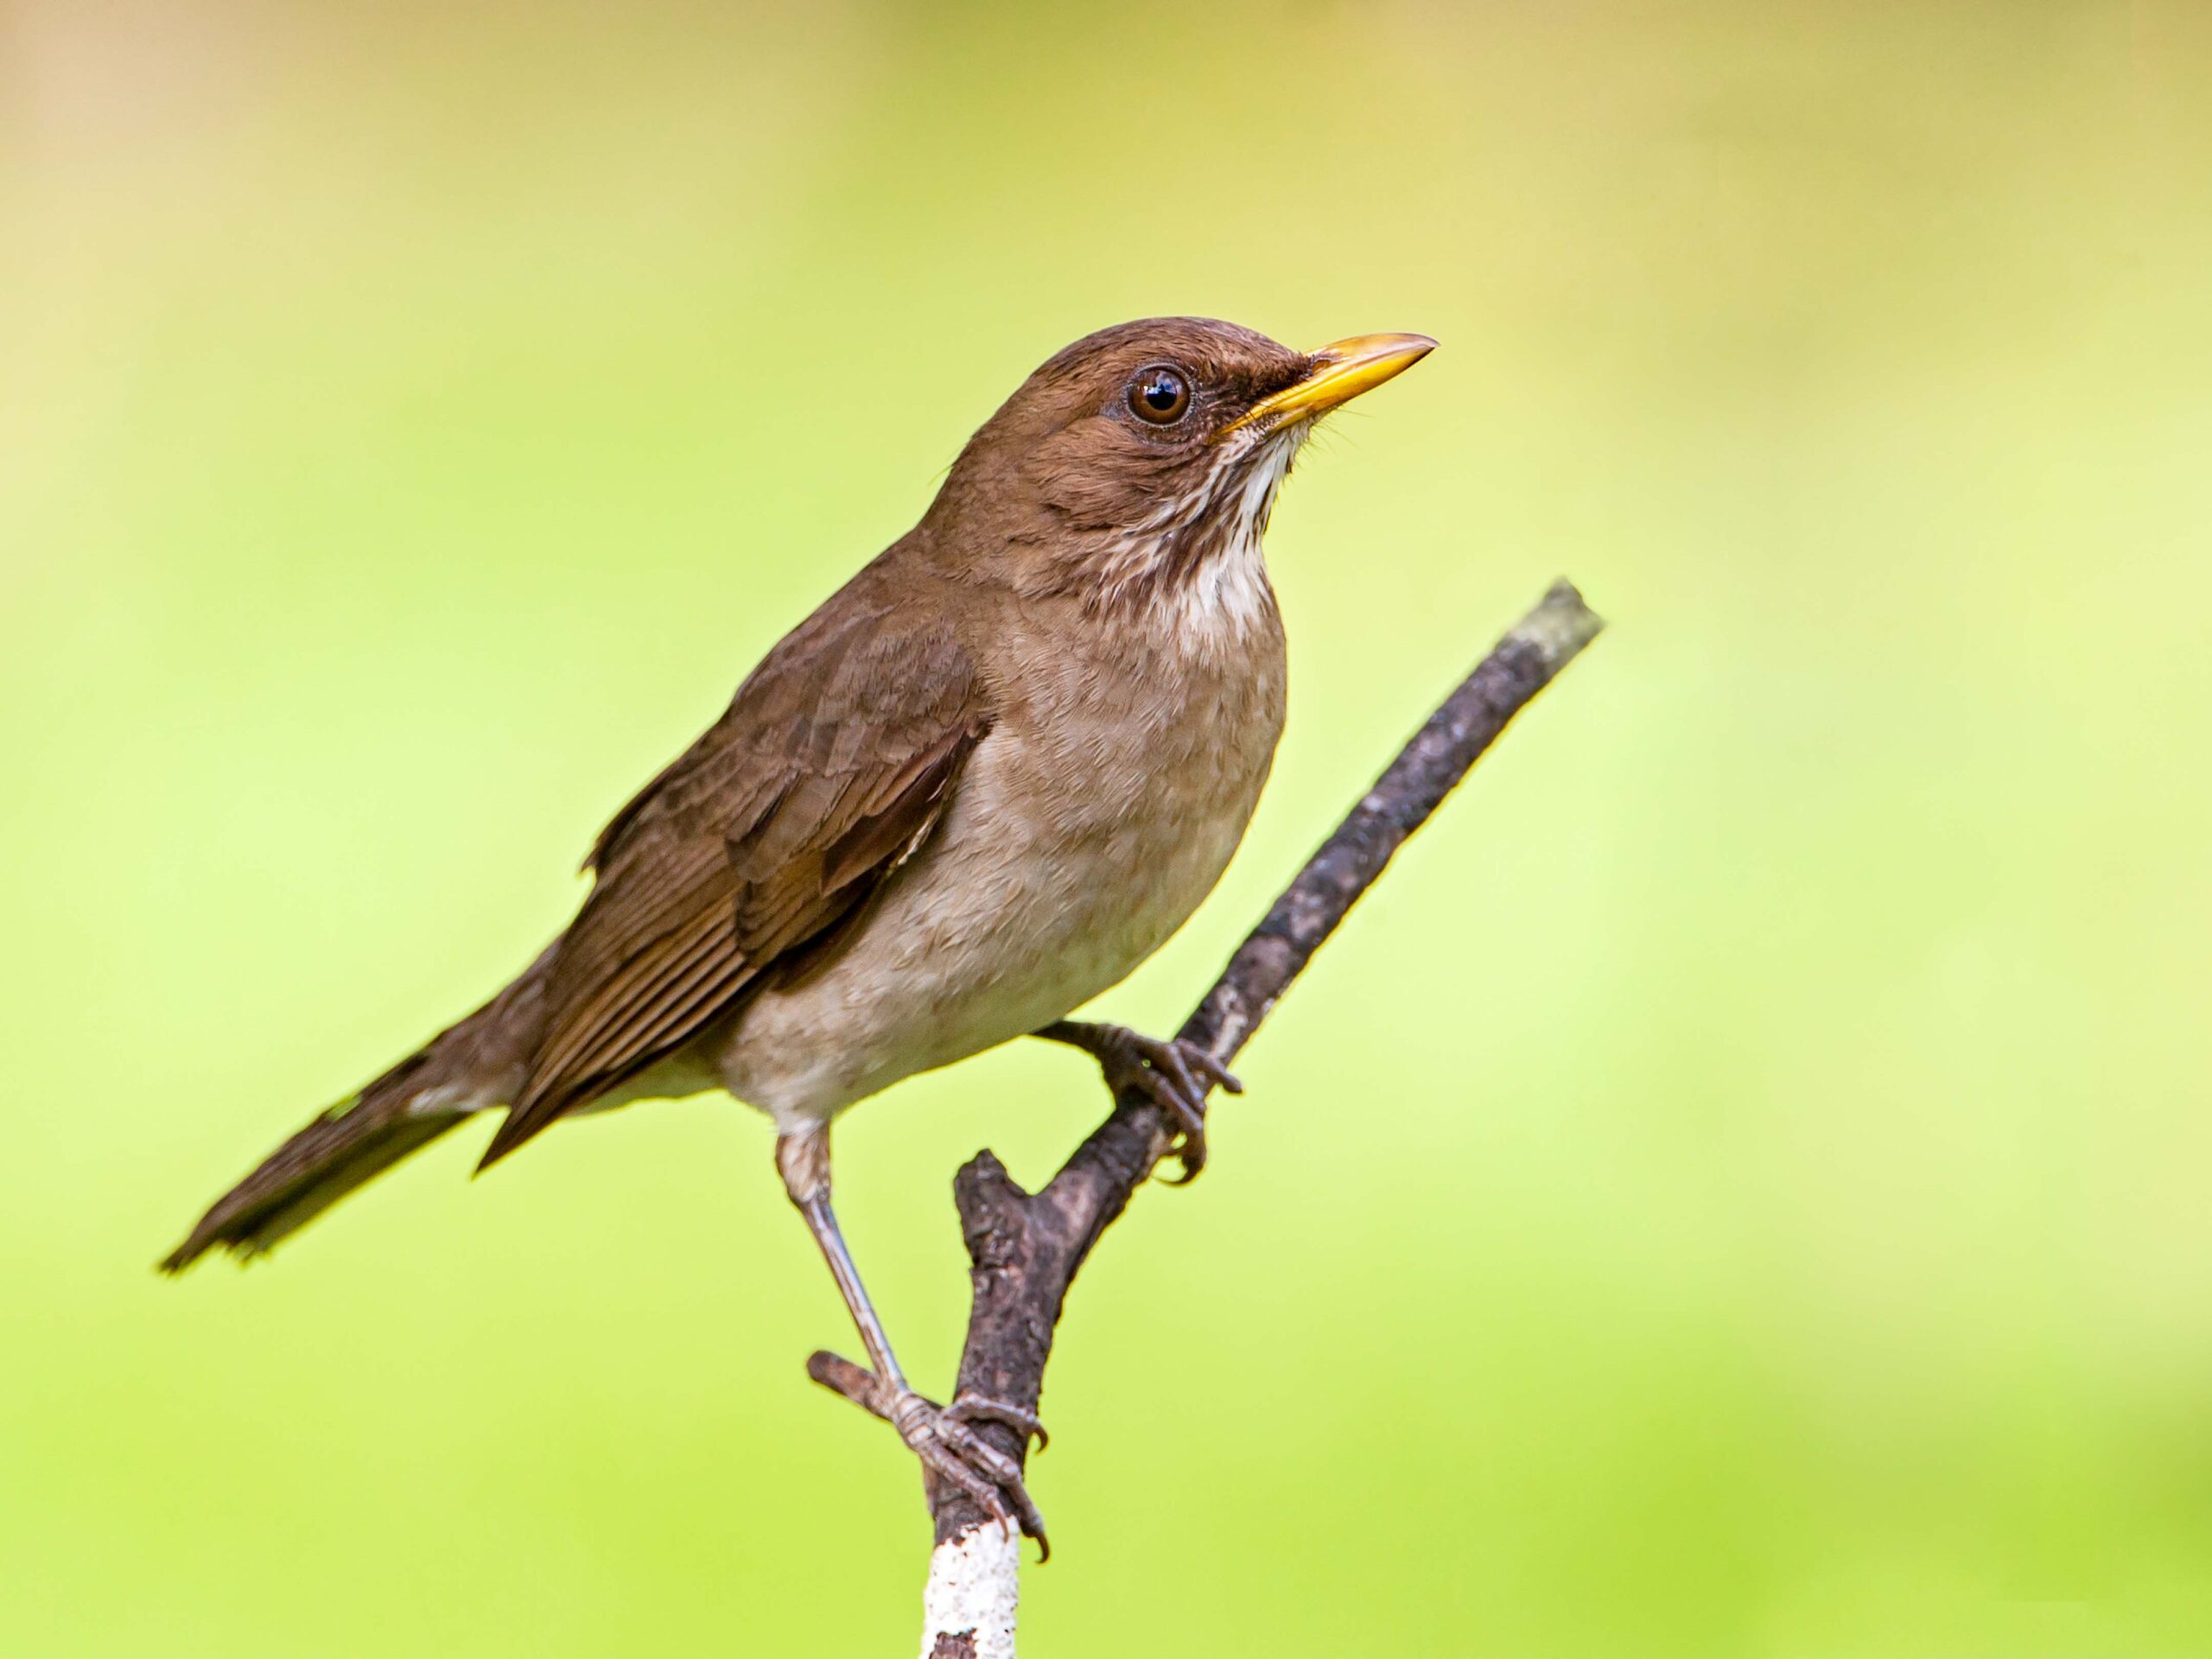 Creamy-bellied Thrush in the Atlantic forest of Brazil